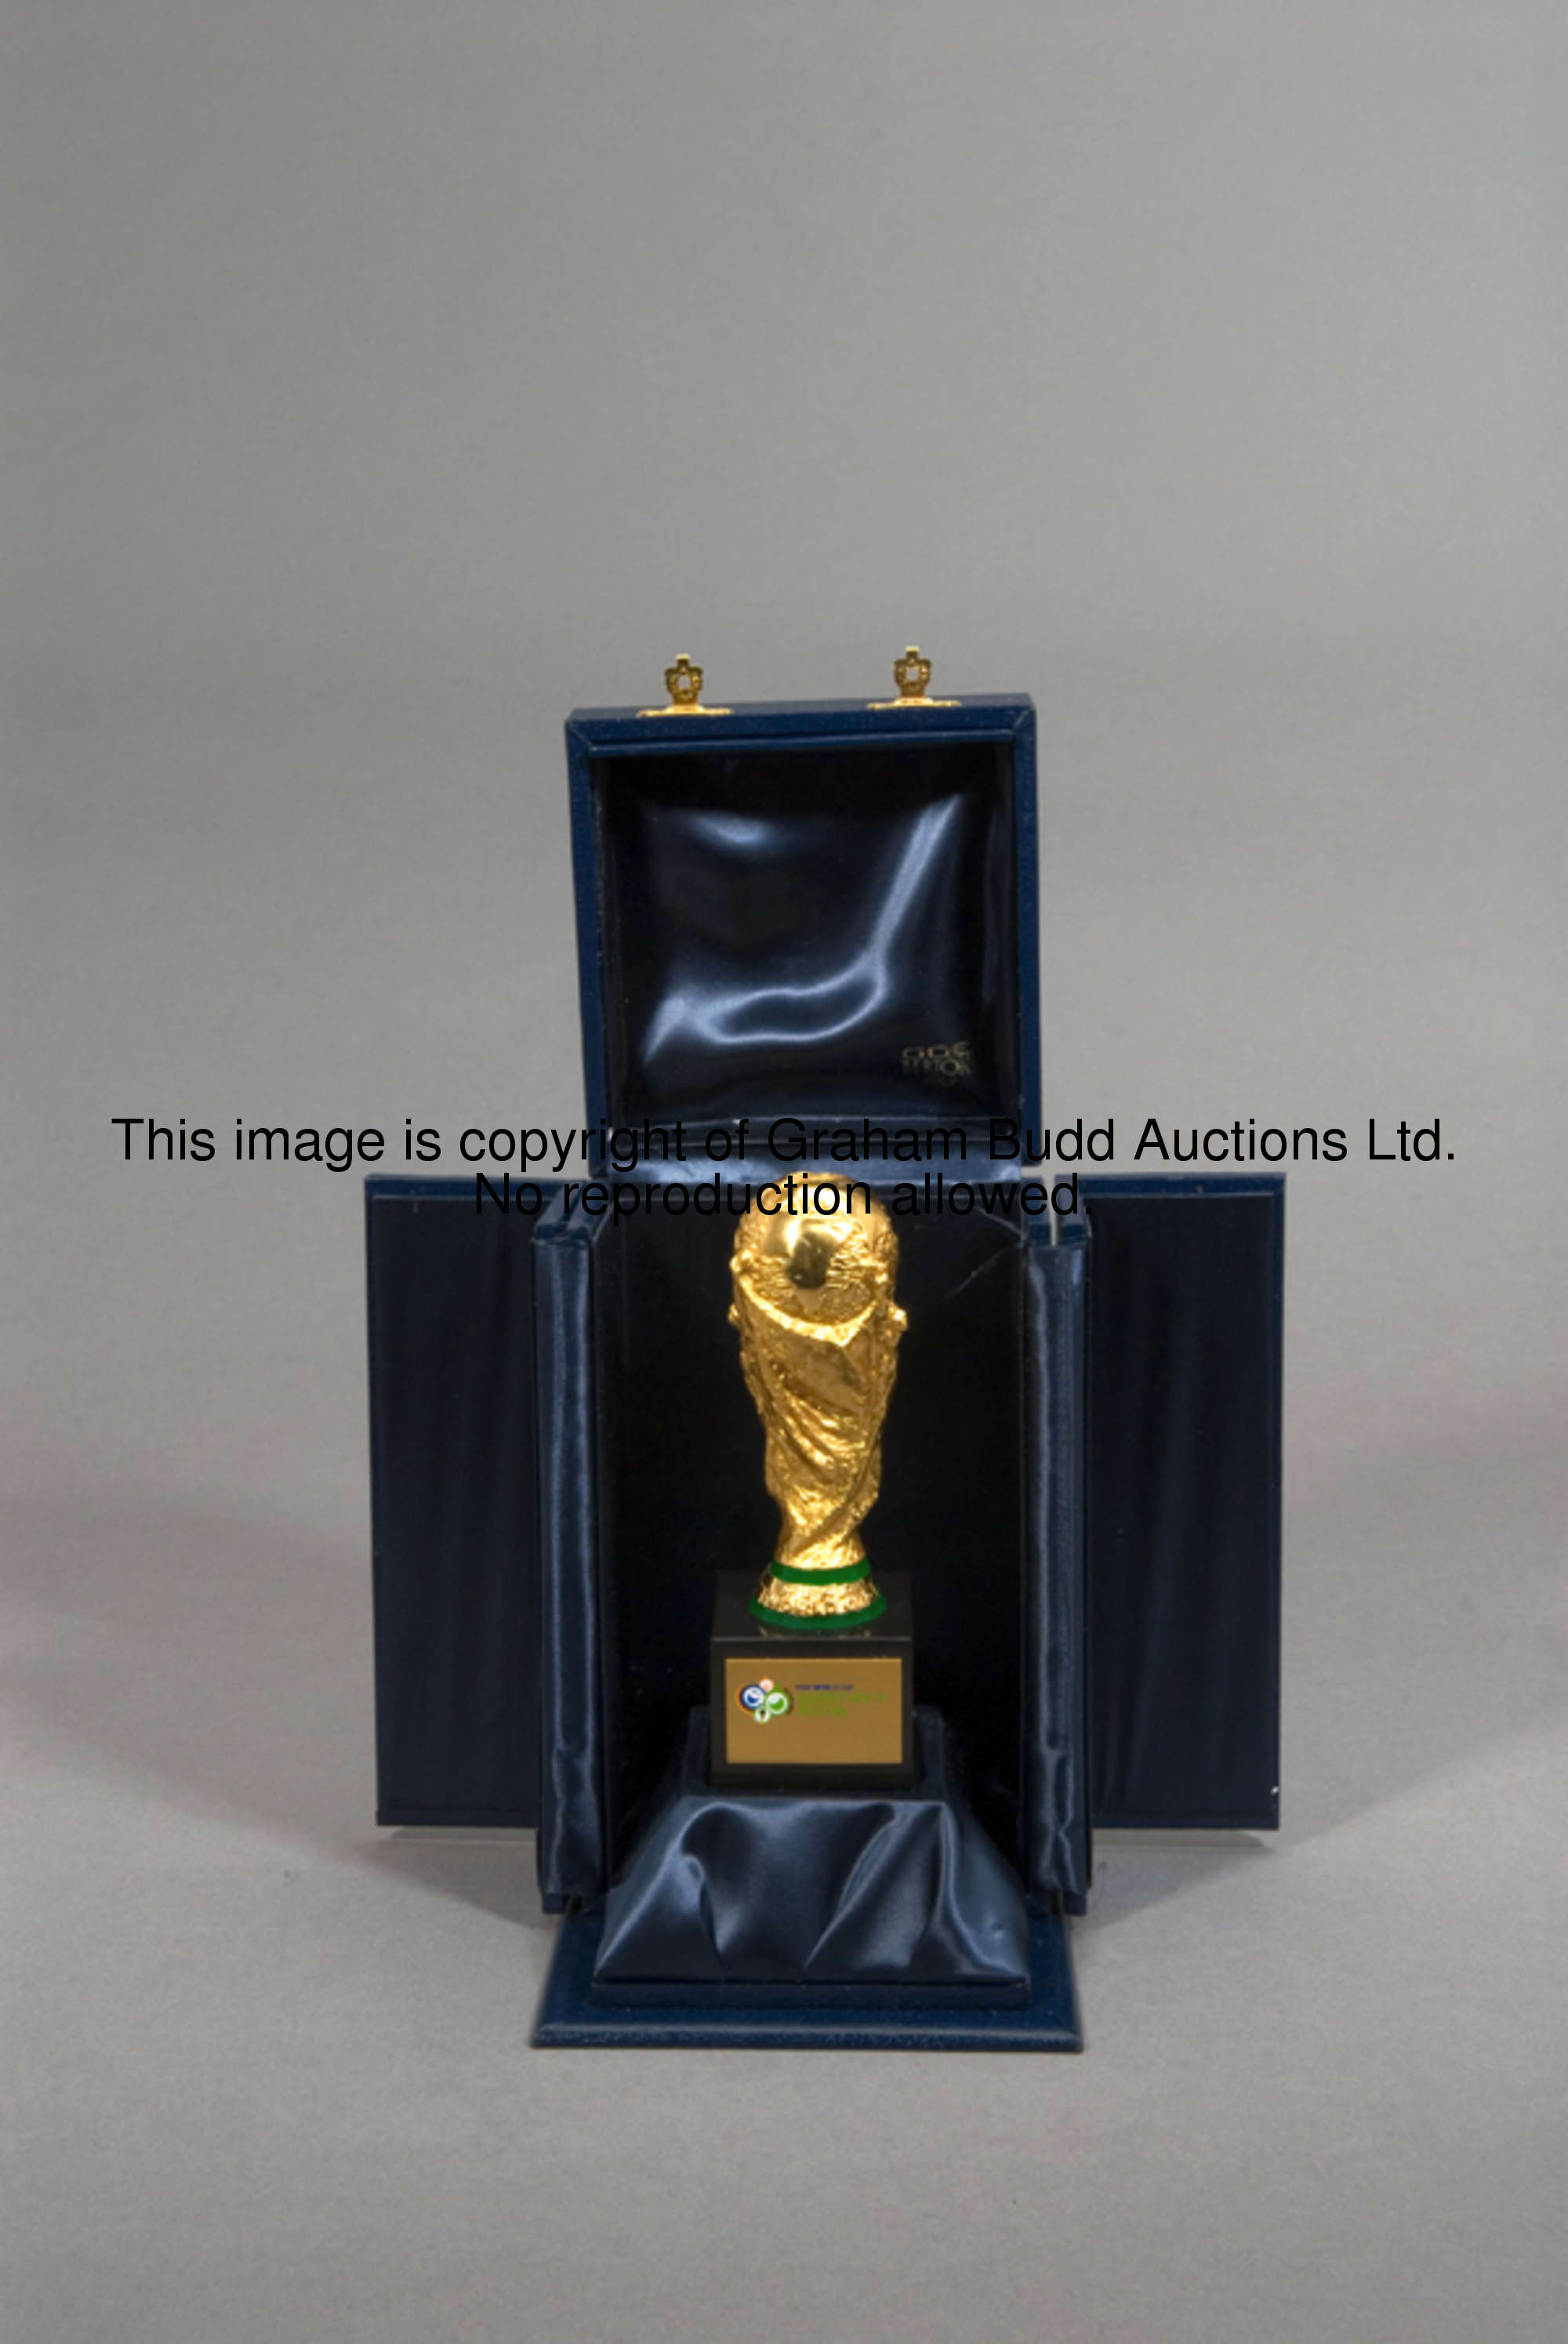 A miniature replica of the World Cup trophy presented by FIFA to